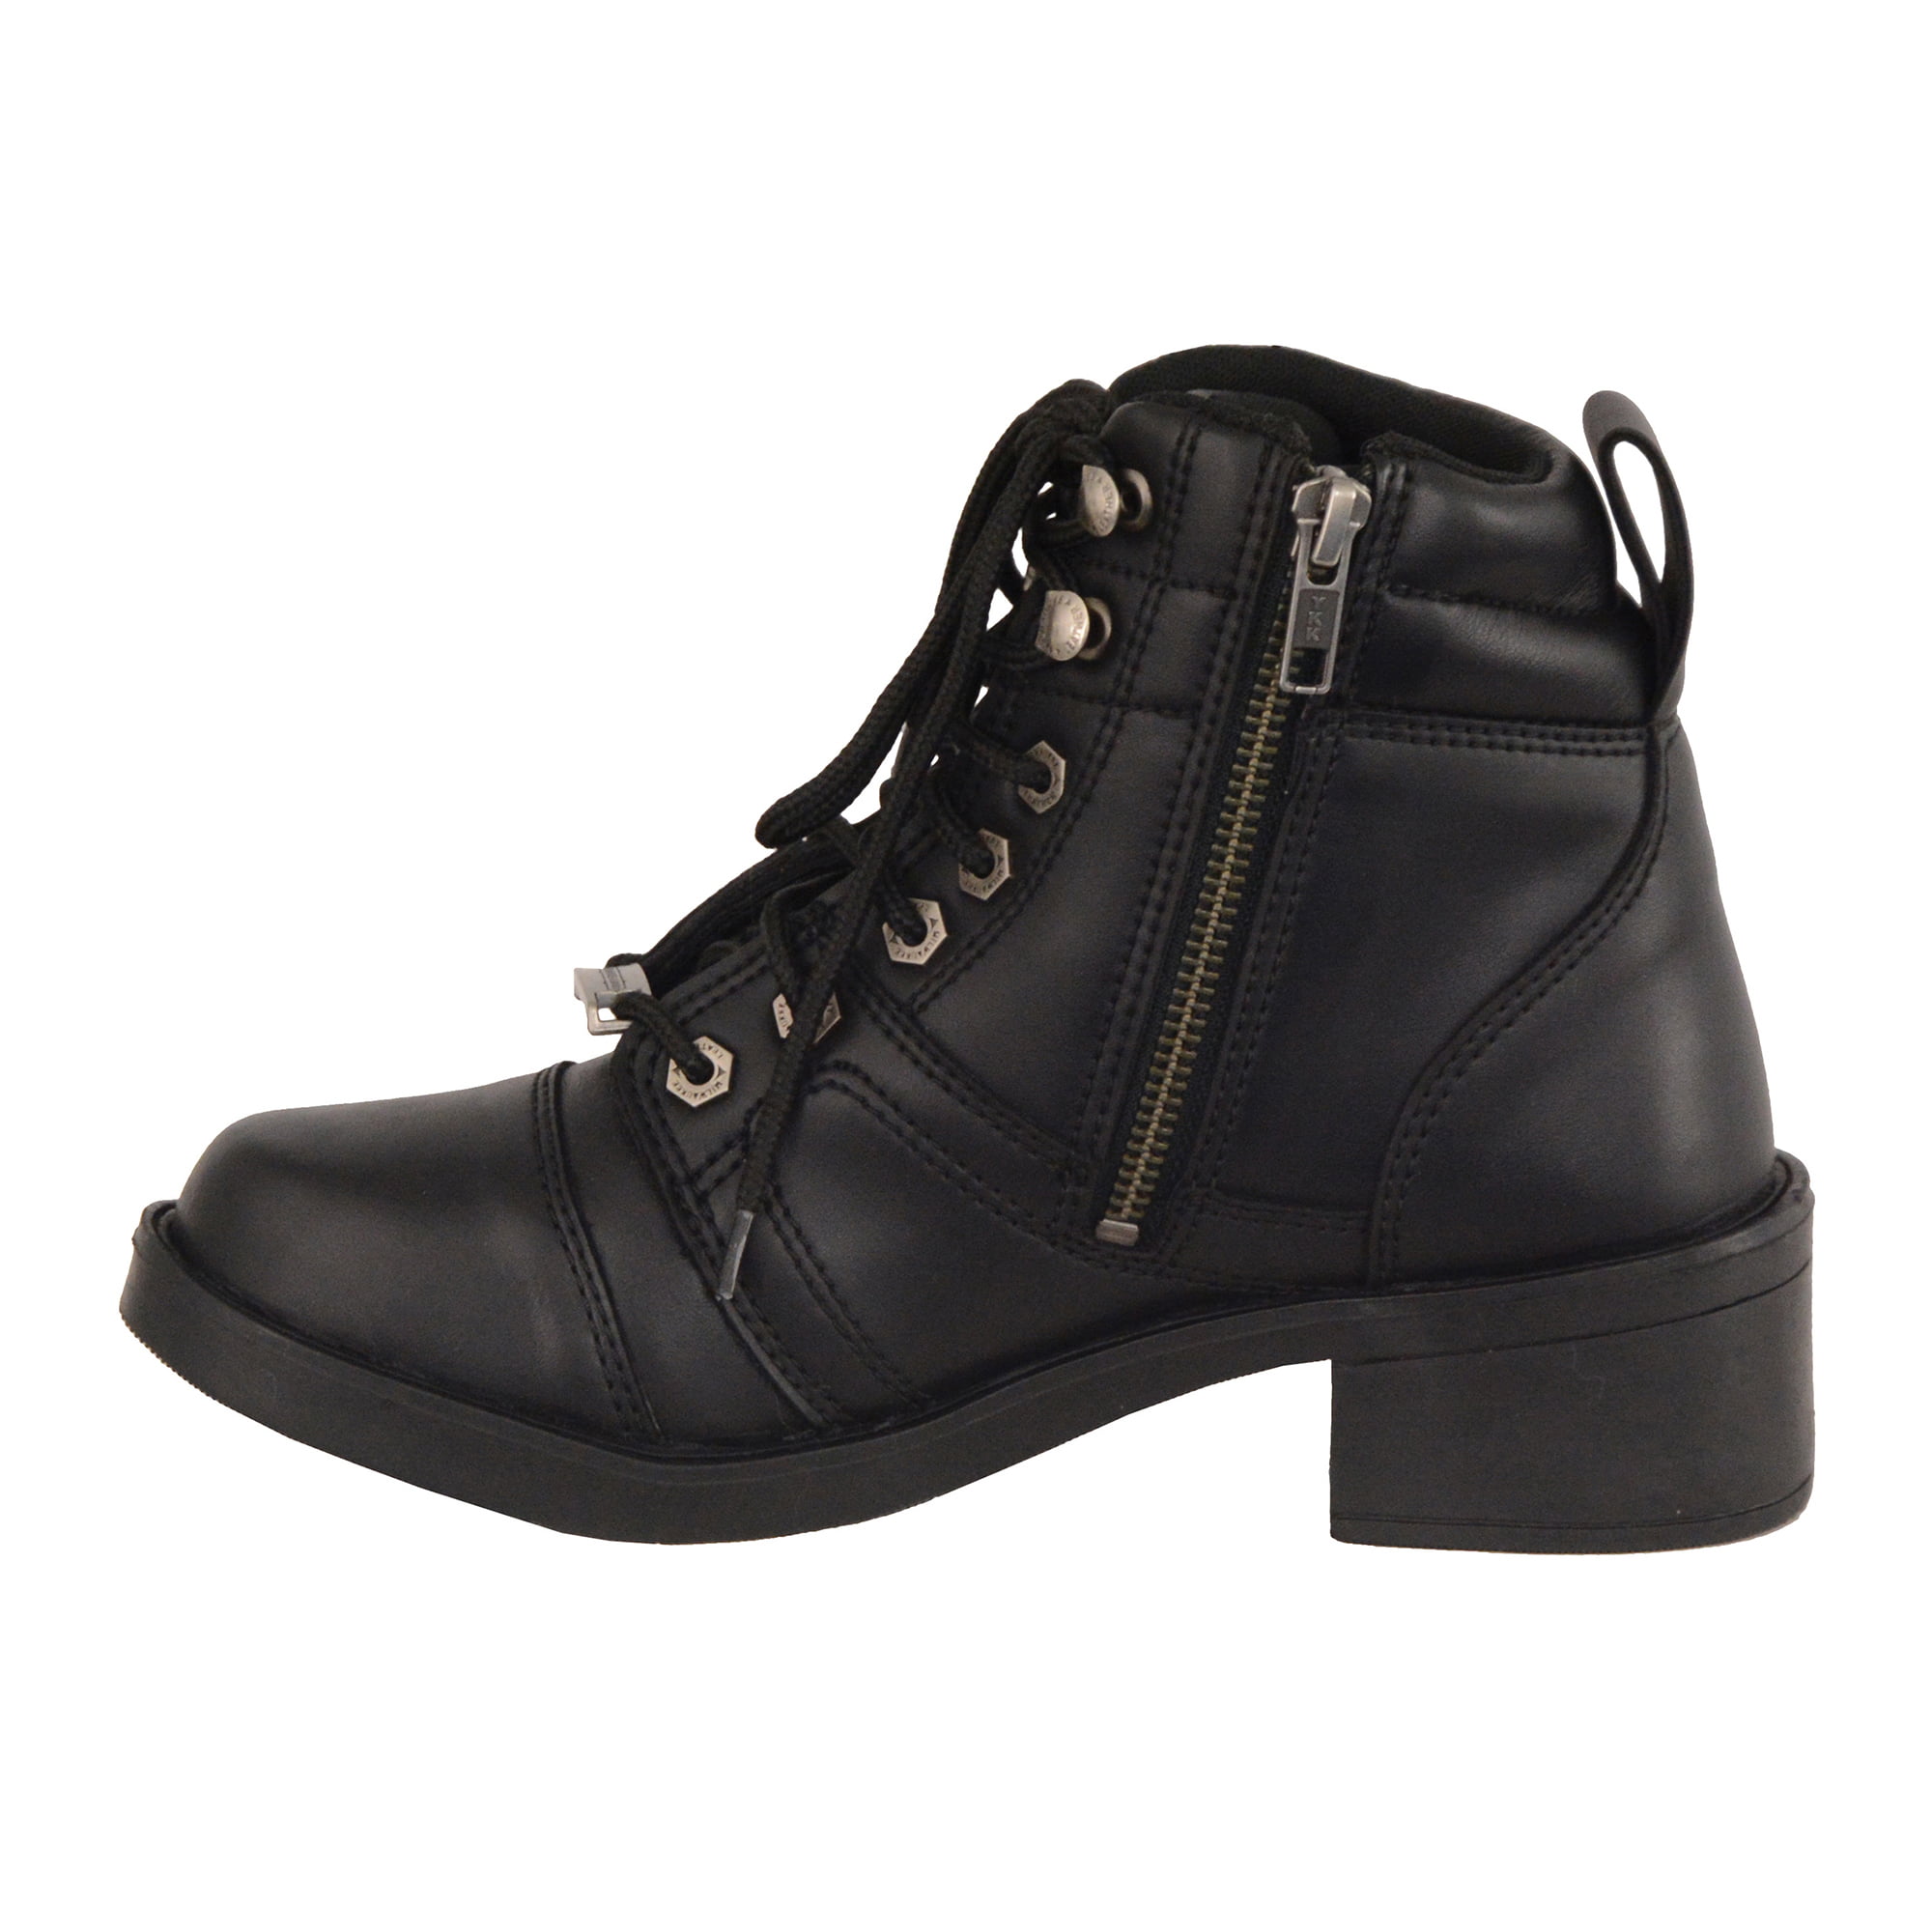 Black, Size 1.5 Milwaukee Leather Boys Youth Side Zipper Lace To Toe Boots MBK9255-BLK-1.5 